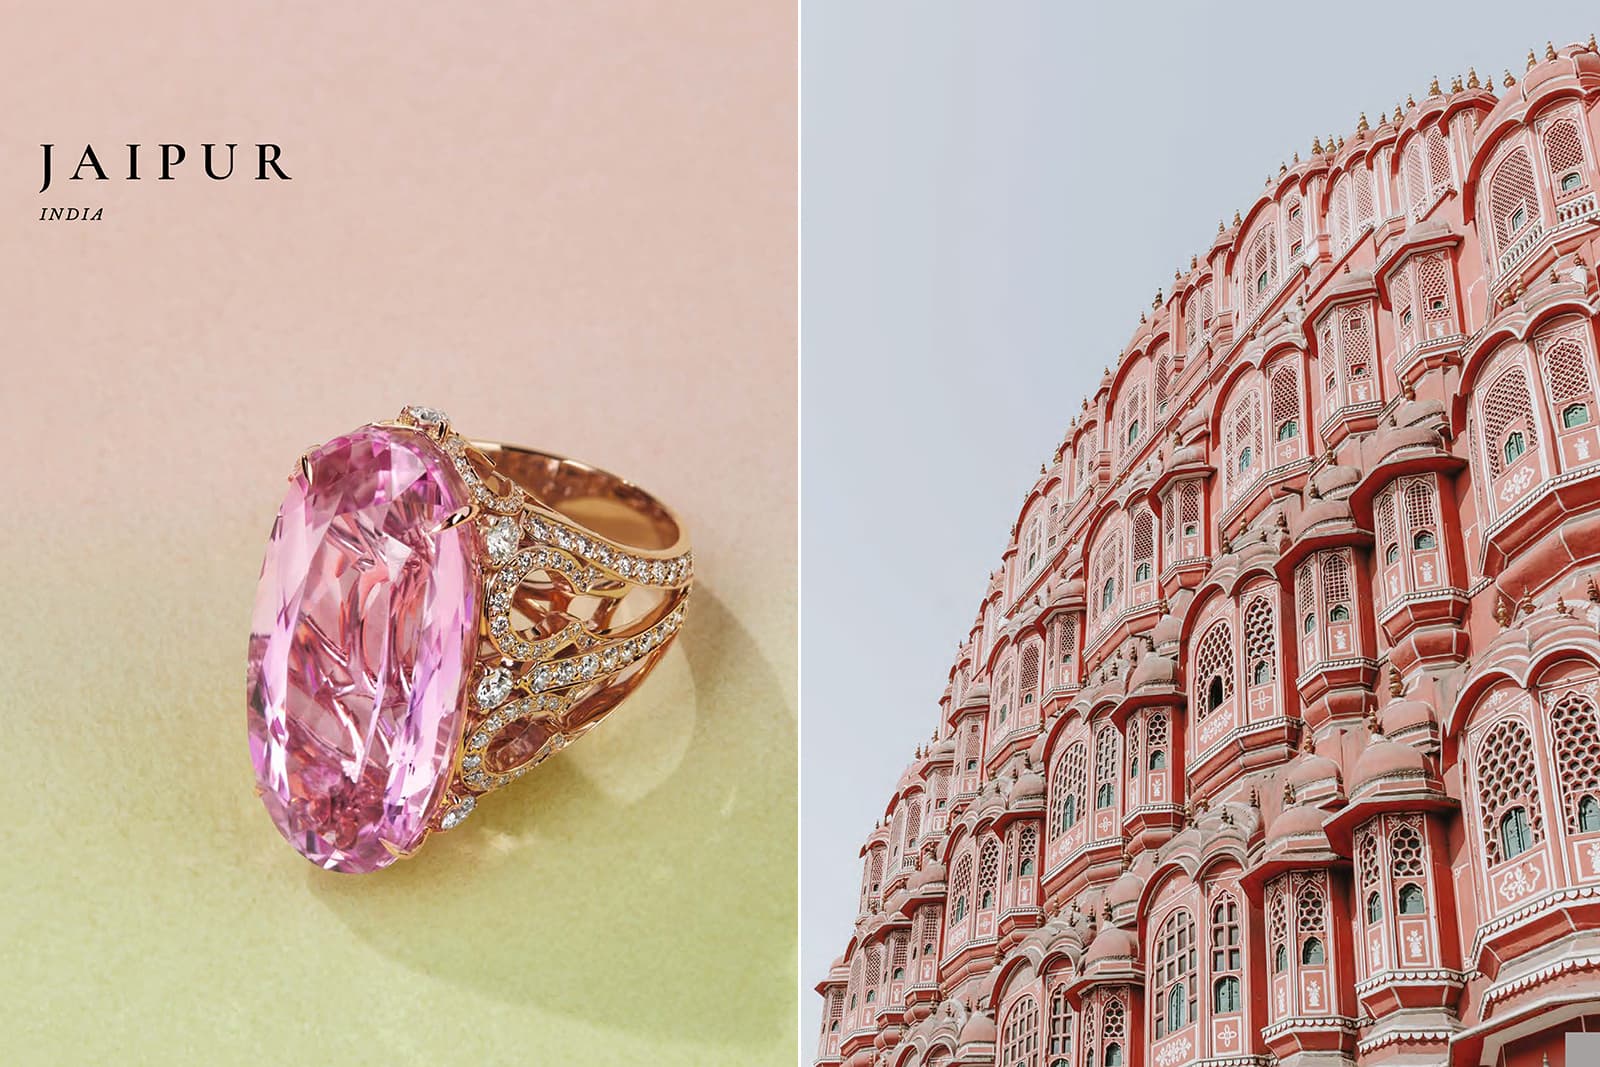 Boodles Jaipur ring with a 21 carat pink morganite from the ‘Around the World in 16 Days’ High Jewellery collection, inspired by the famous ‘pink palace’ – Hawa Mahal – in Jaipur, India 